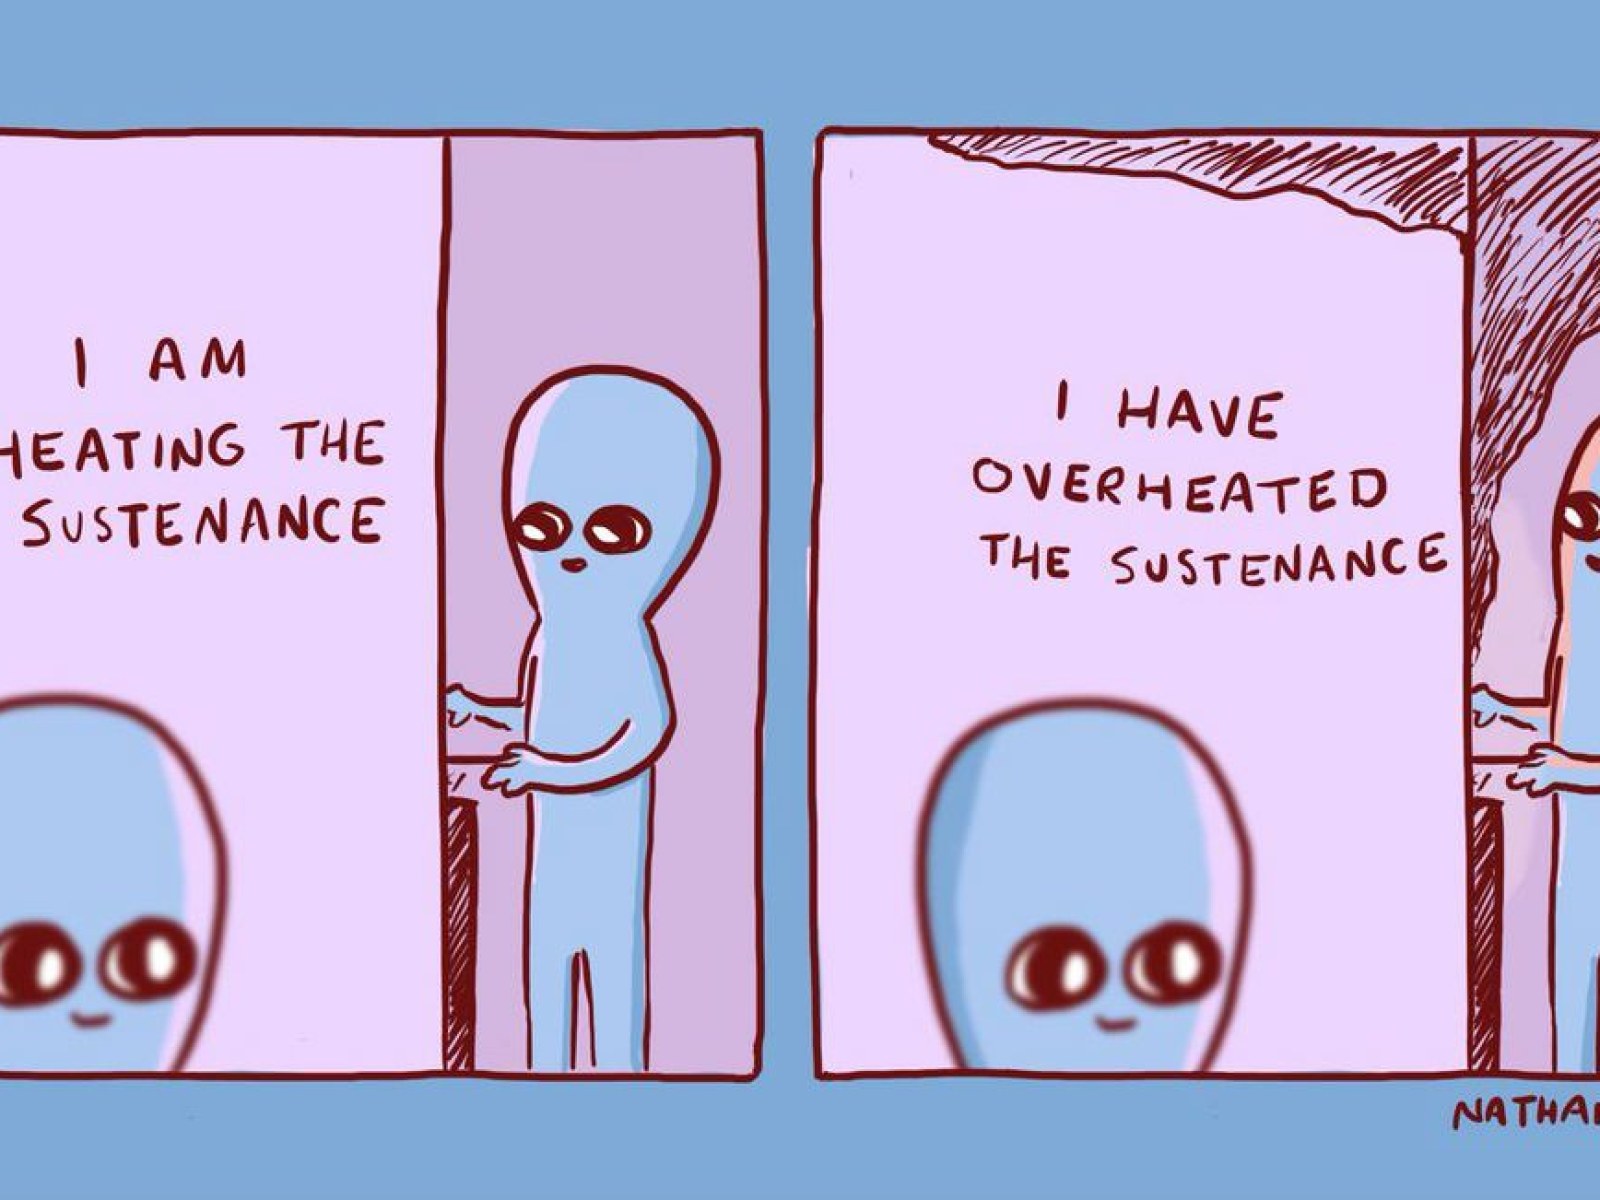 Strange Planet Cartoonist Nathan Pyle Embroiled In Twitter Controversy For Pro Life Tweet